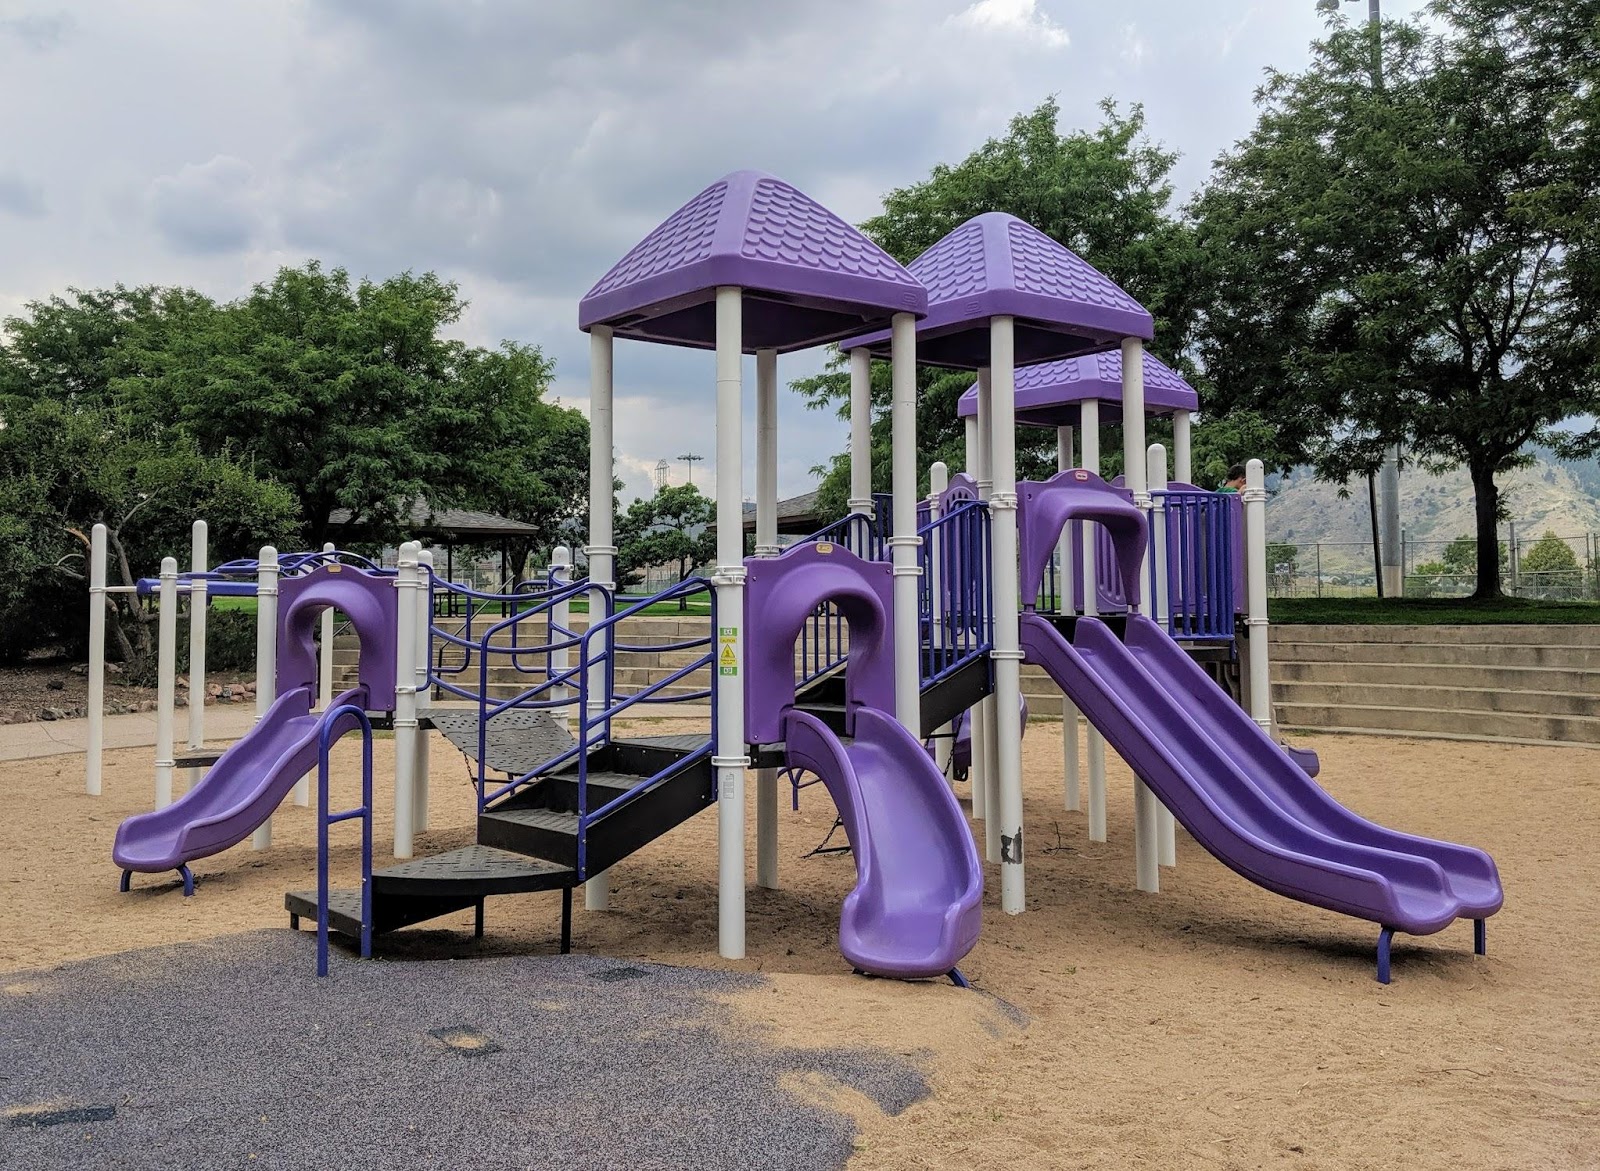 Awesome Golden Playgrounds Your Kids Will Love! The Golden Group Real Estate Advisors picture